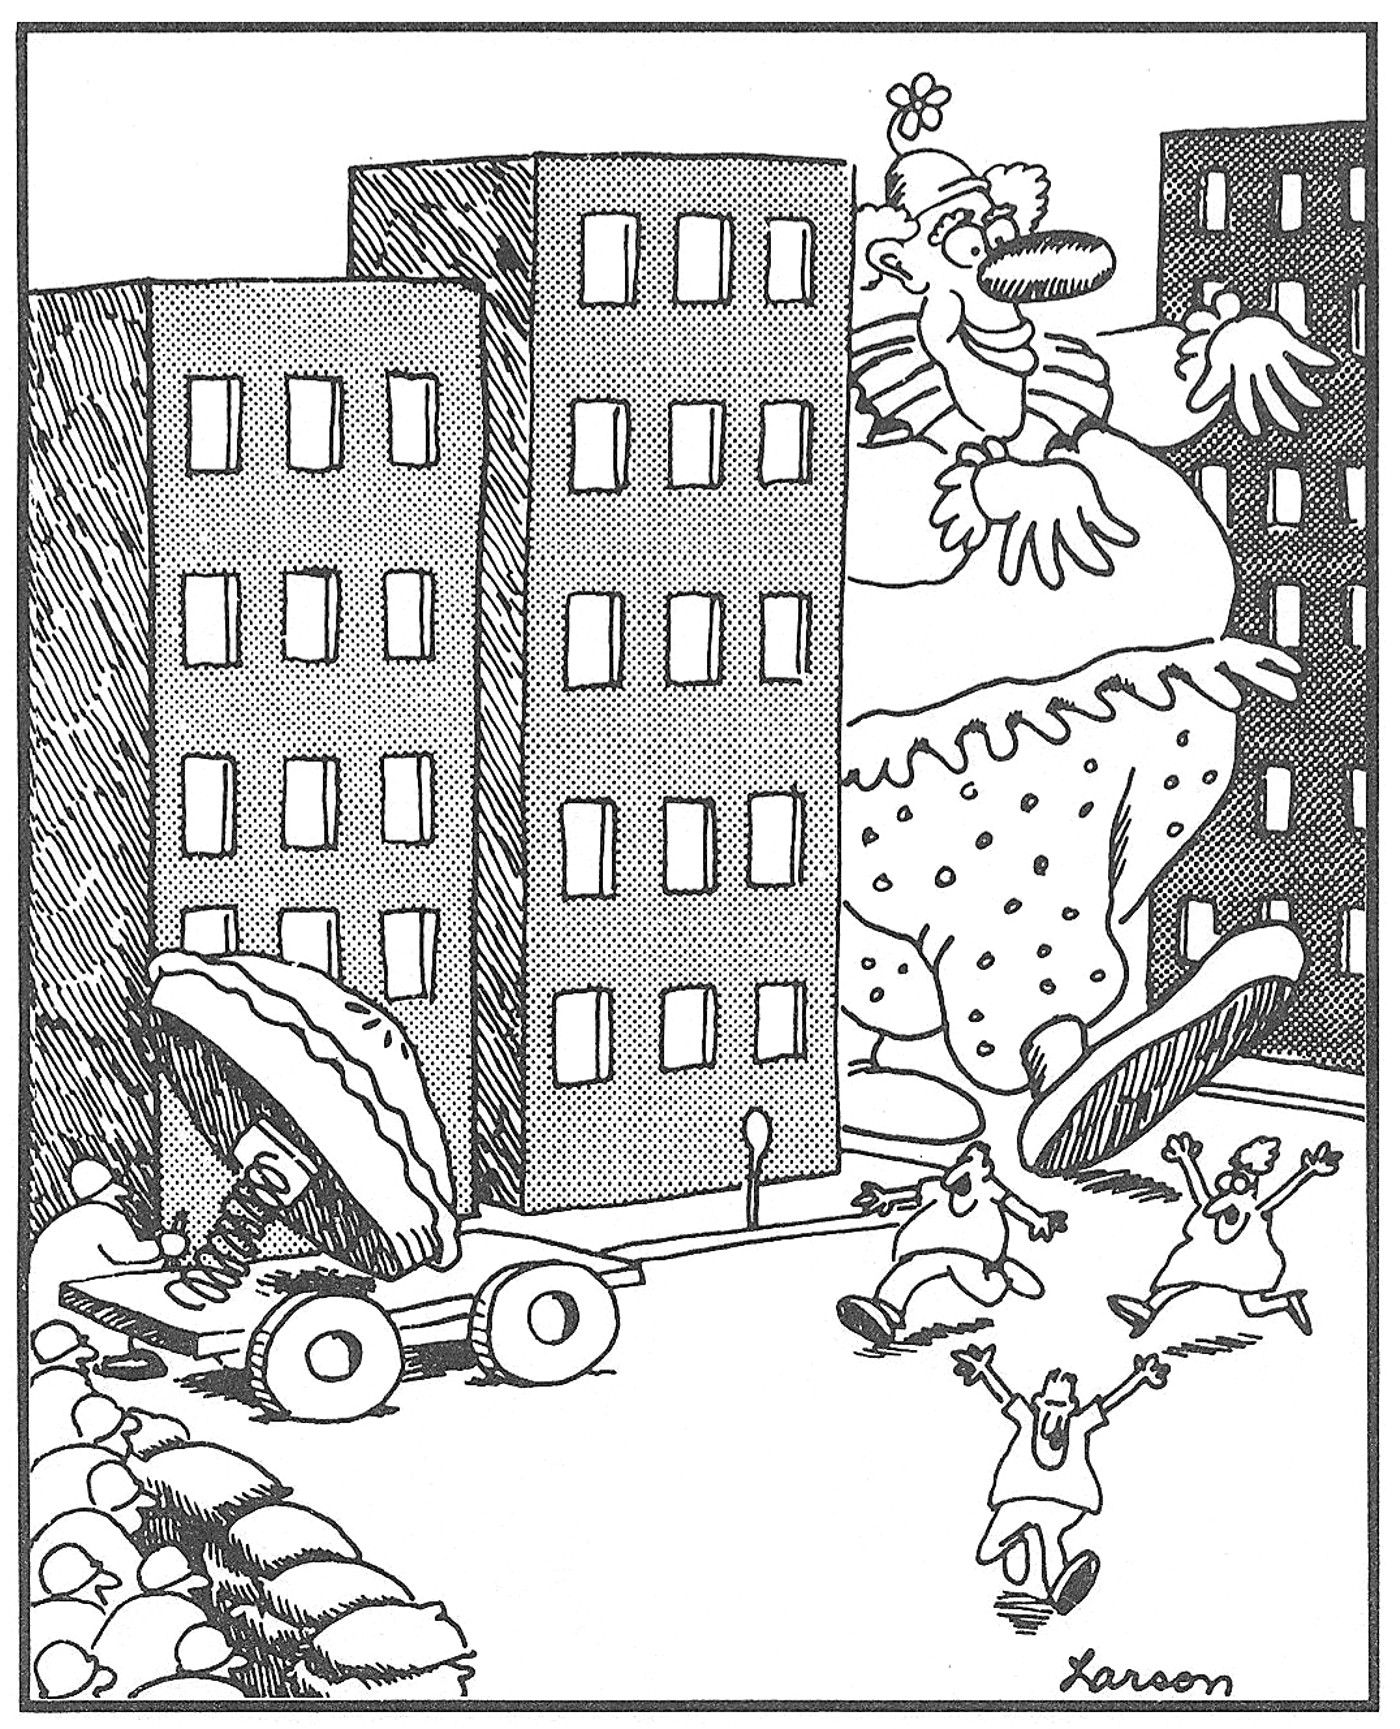 the far side a giant clown stamps around town like godzilla